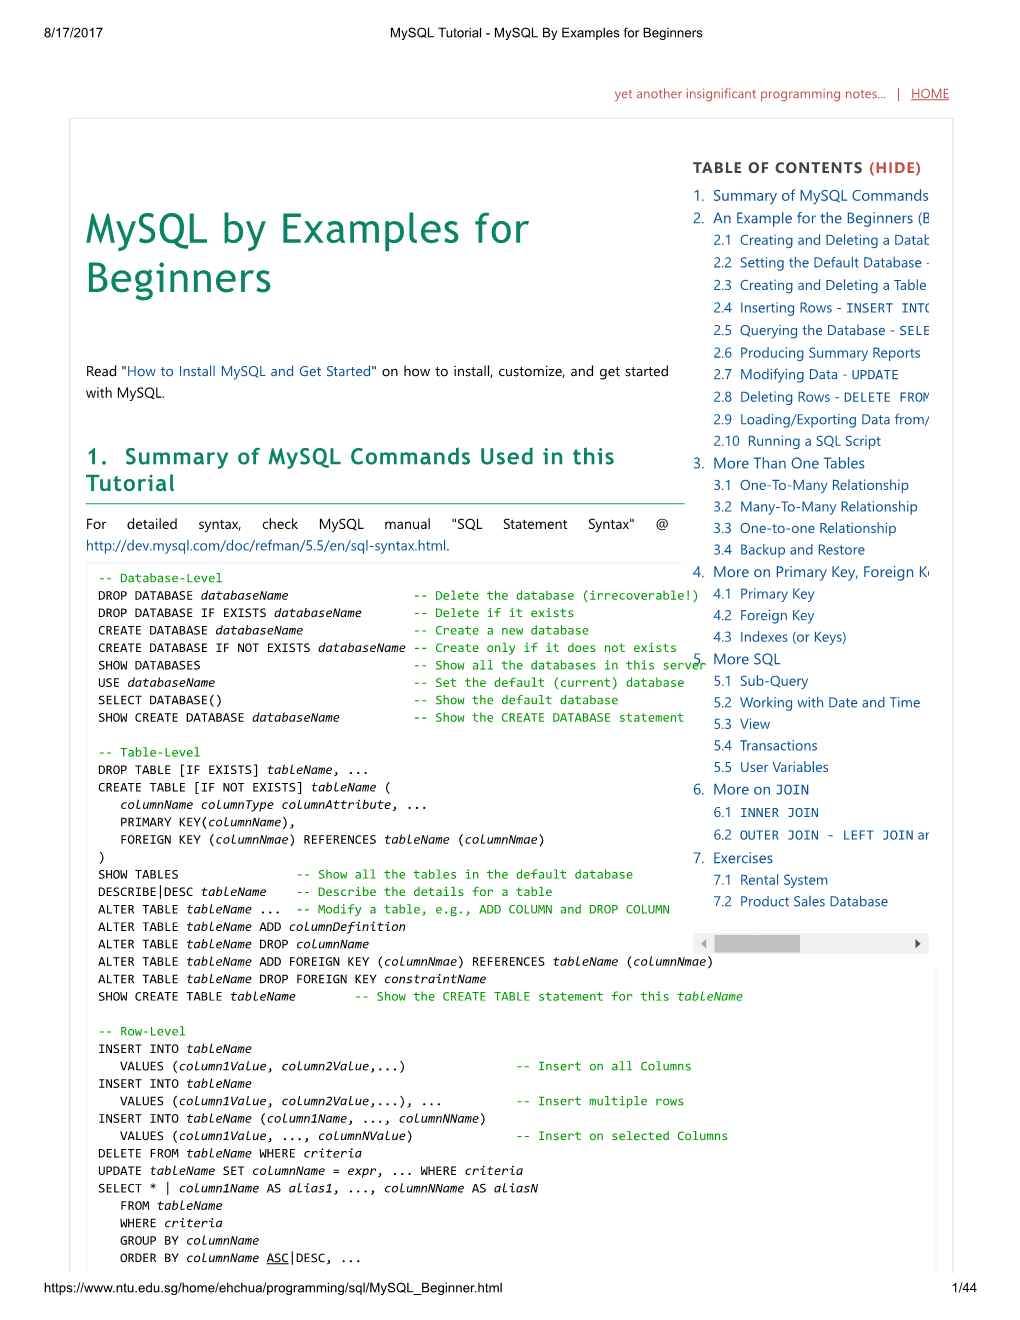 Mysql by Examples for Beginners